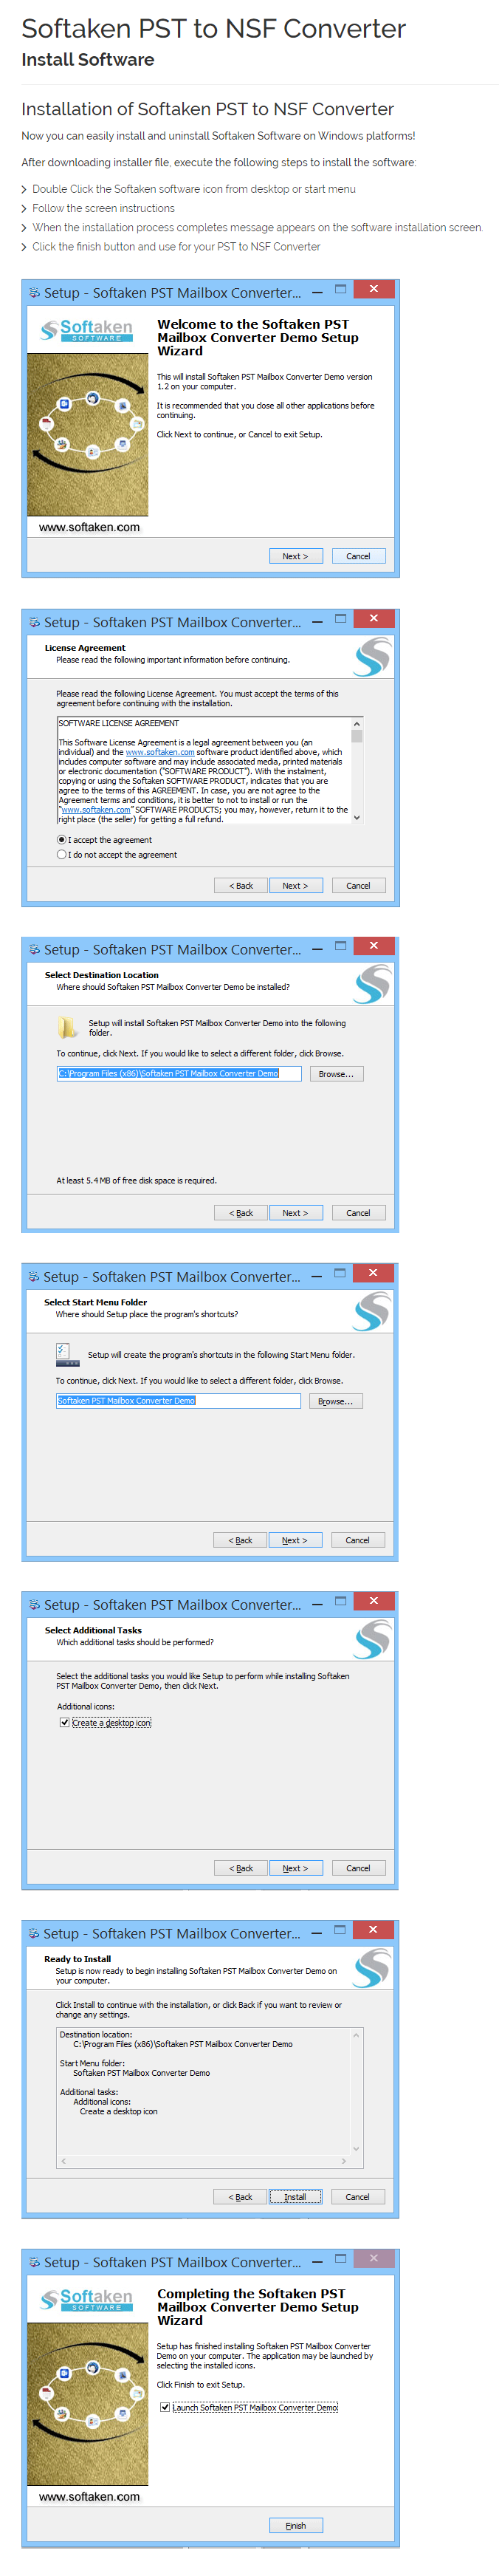 Outlook to Lotus Notes converter Installation